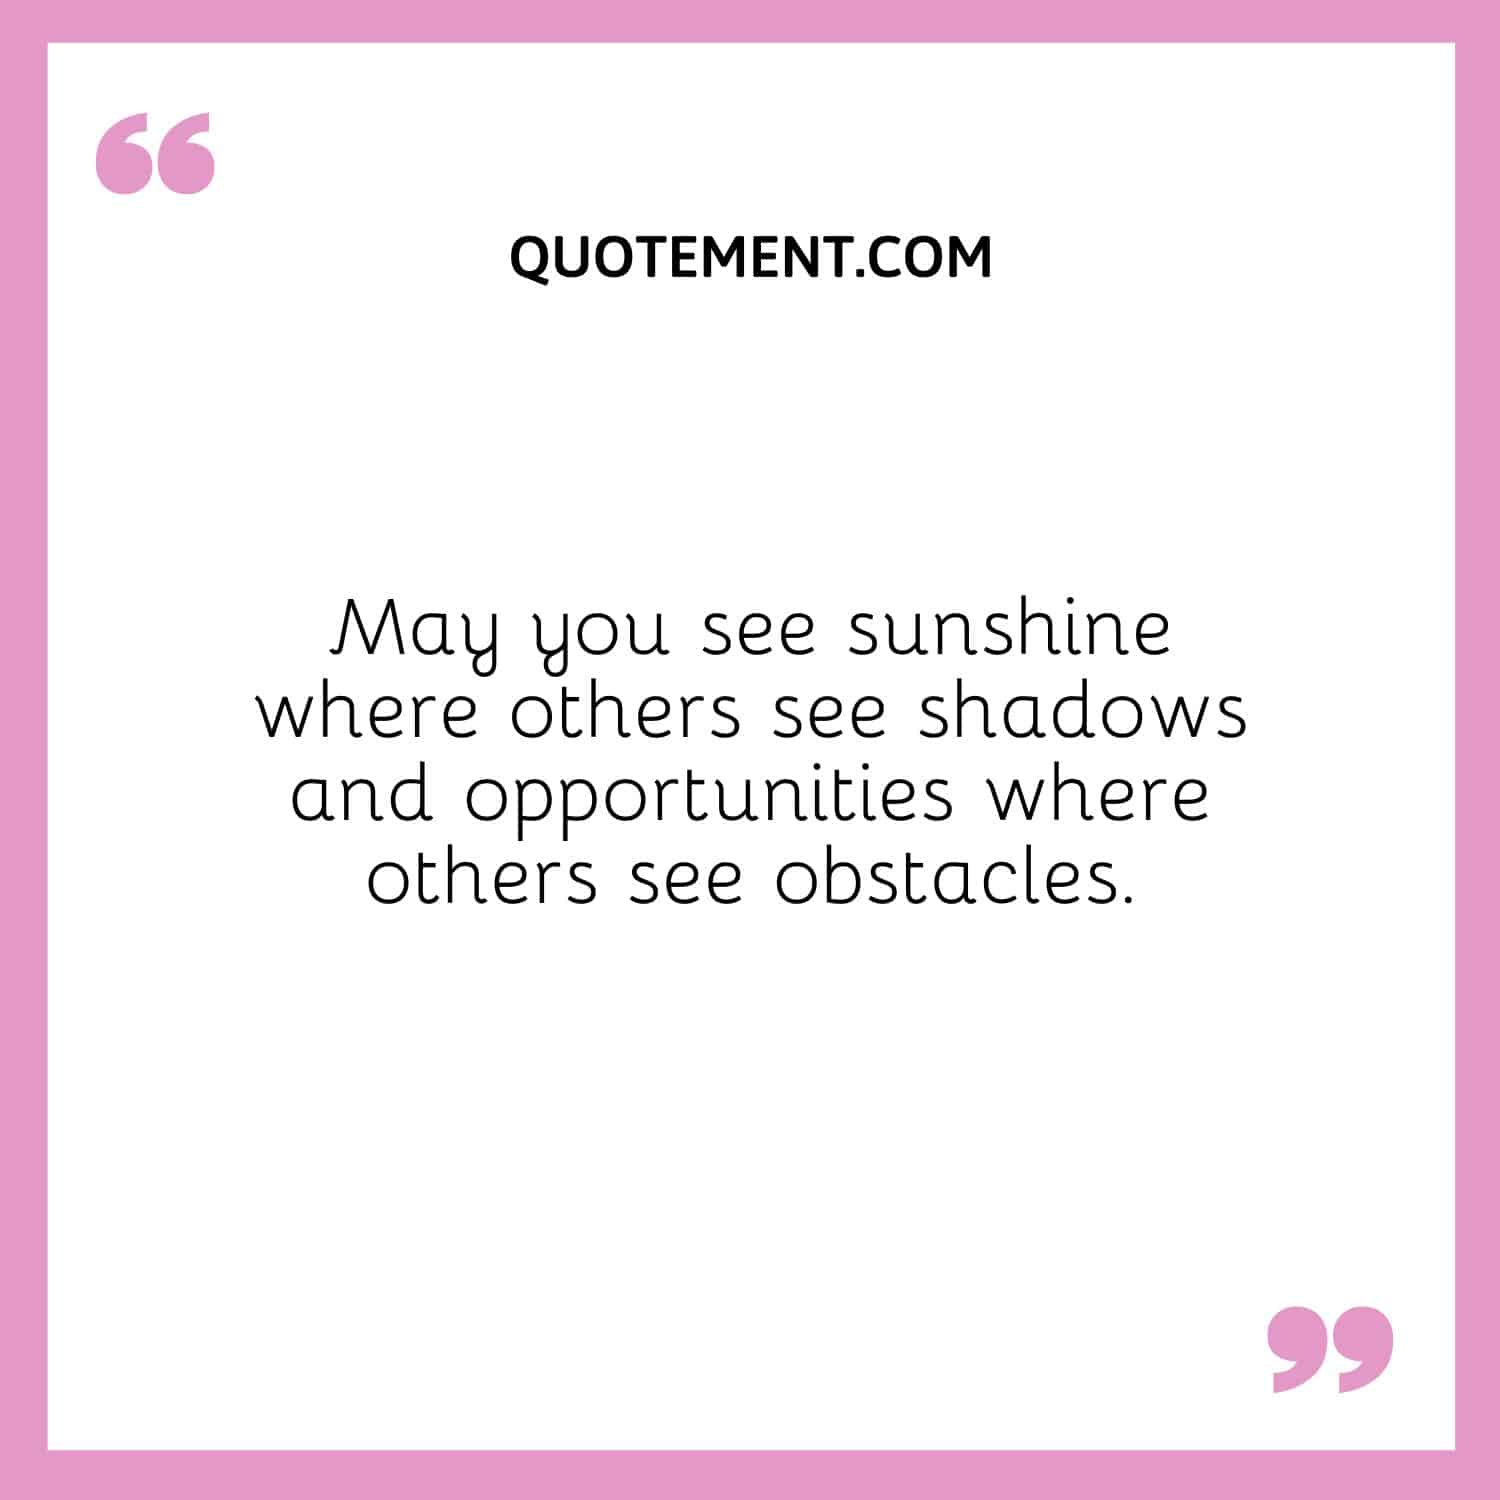 May you see sunshine where others see shadows and opportunities where others see obstacles.